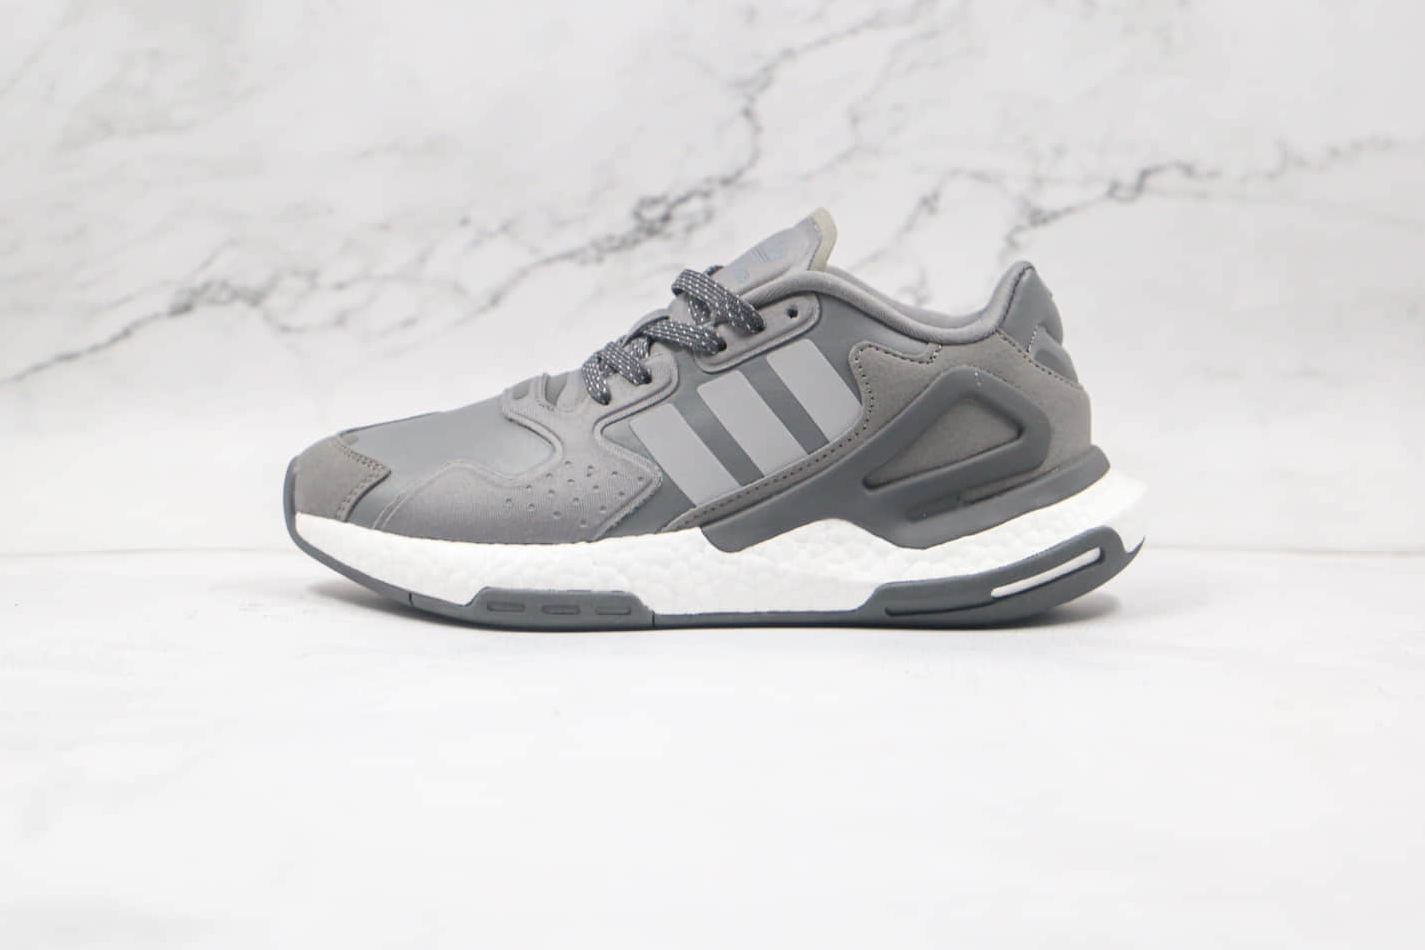 Adidas Originals Day Jogger Boost Core Black Grey FW4822 - Stylish and Comfortable Footwear